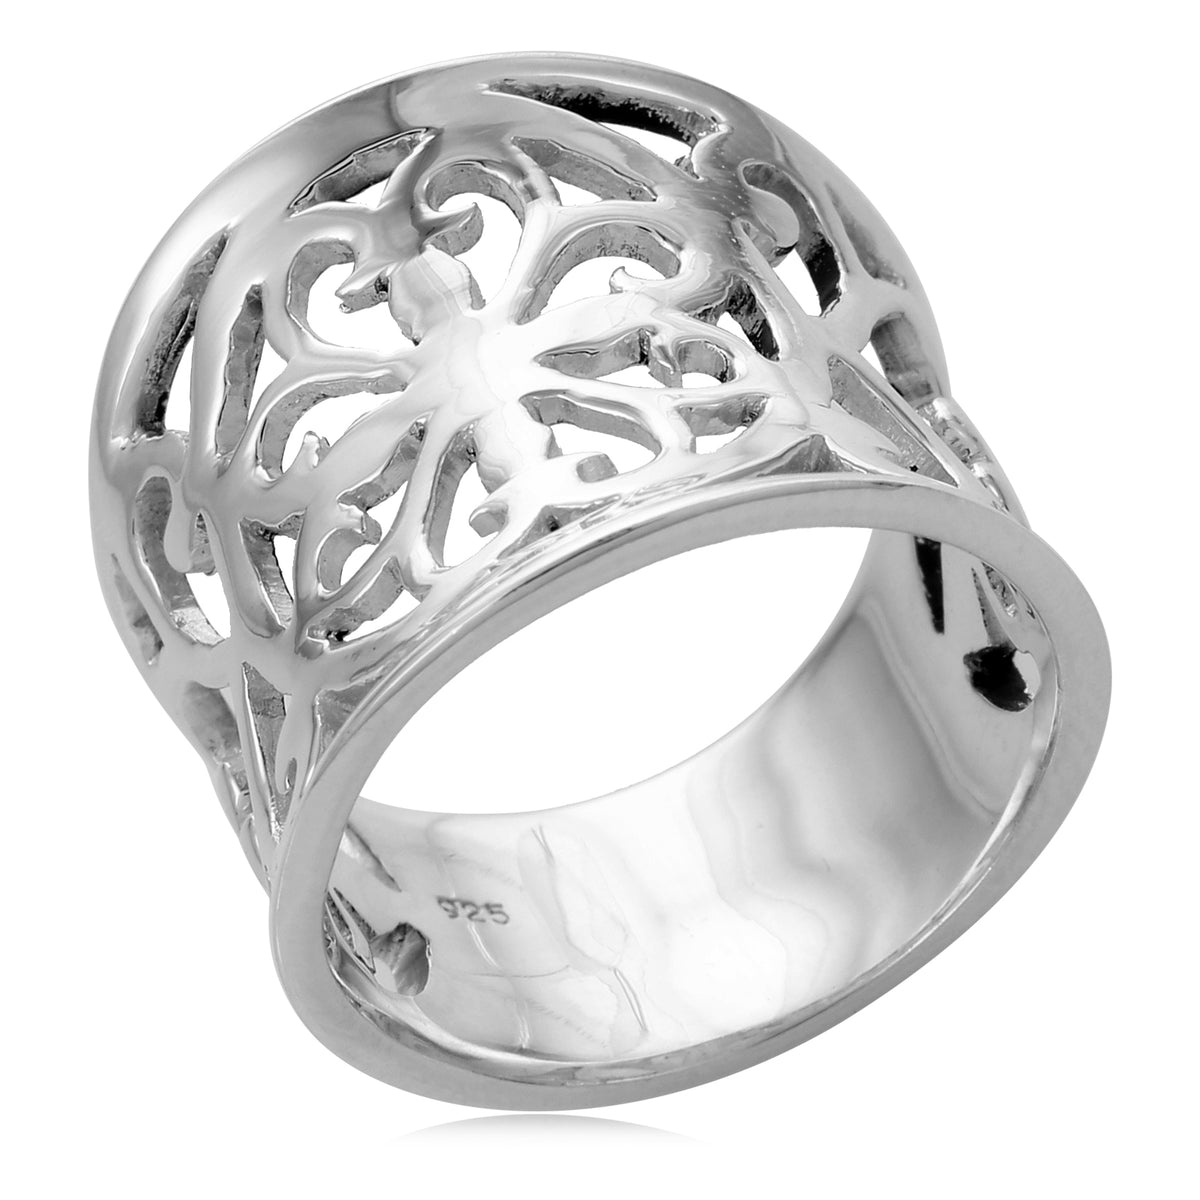 Inspiration Saddle Ring-Retired – Beyond the Gate™